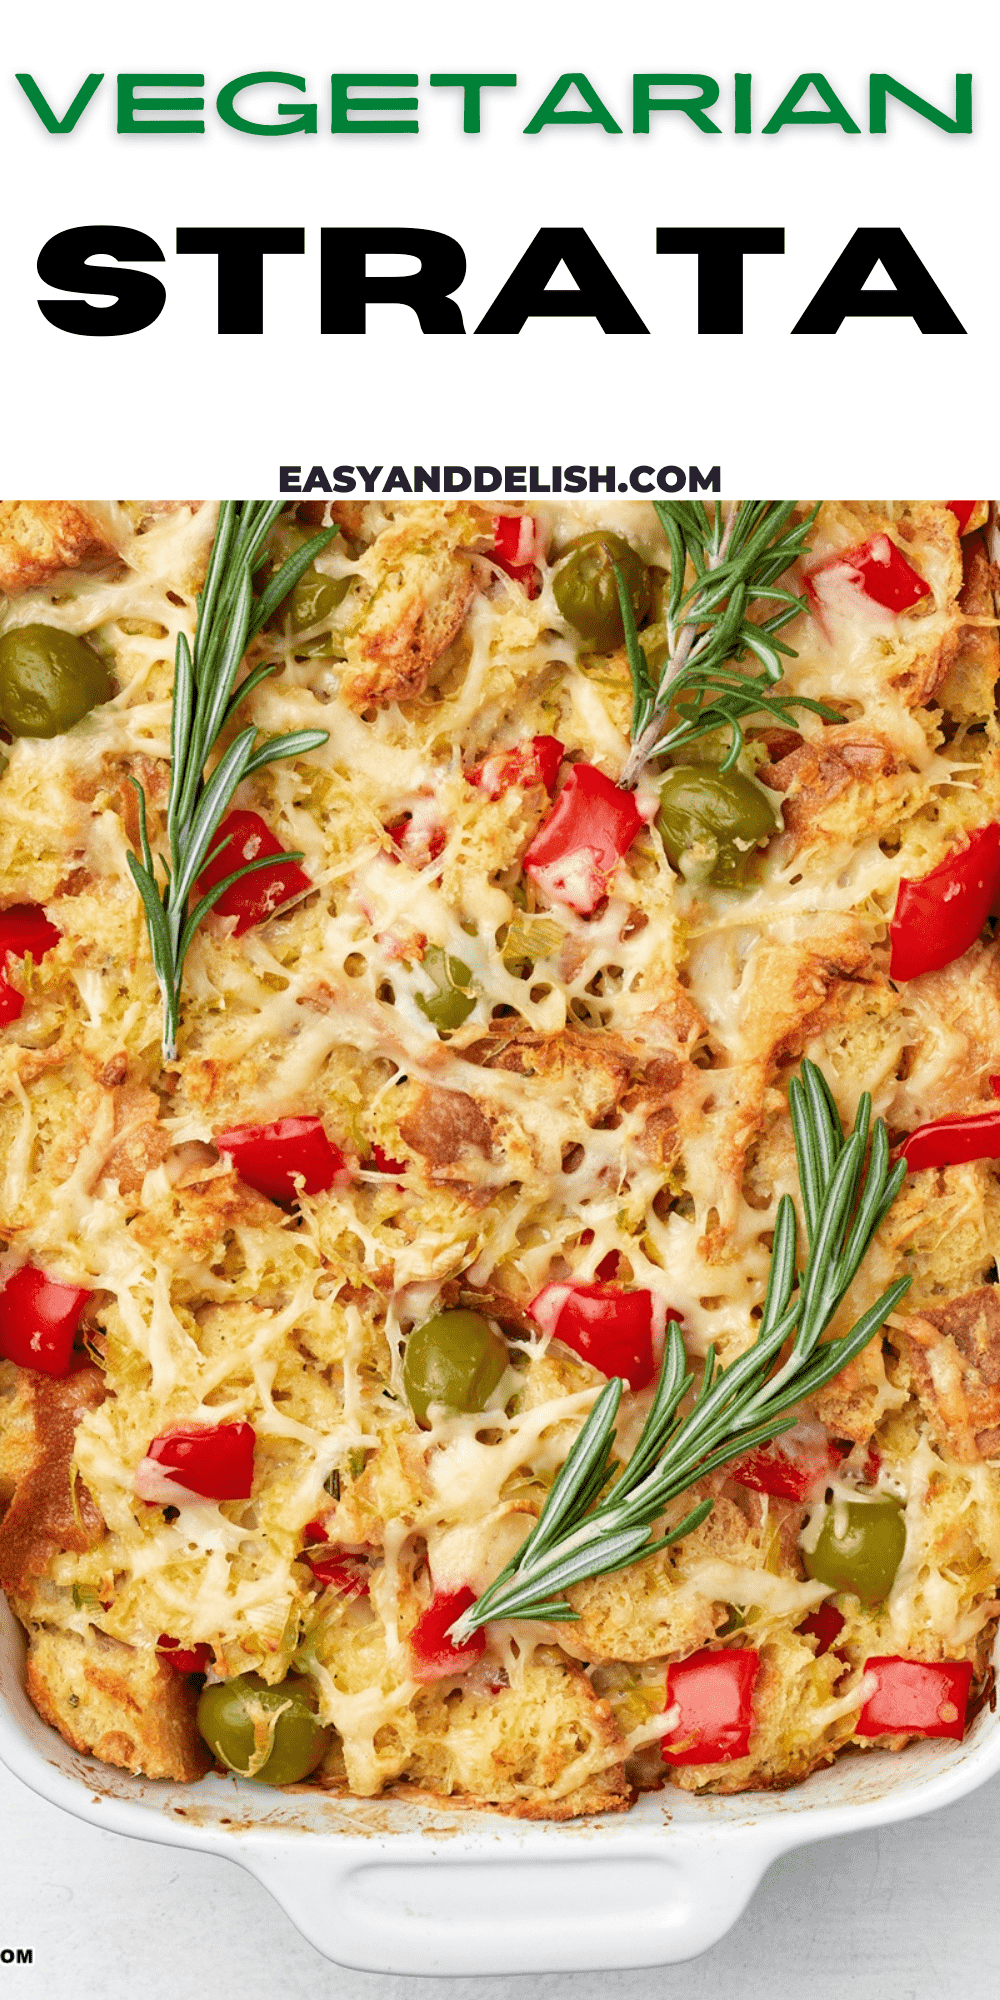 close up of vegetarian strata for breakfast or brunch garnished with roemary sprigs.